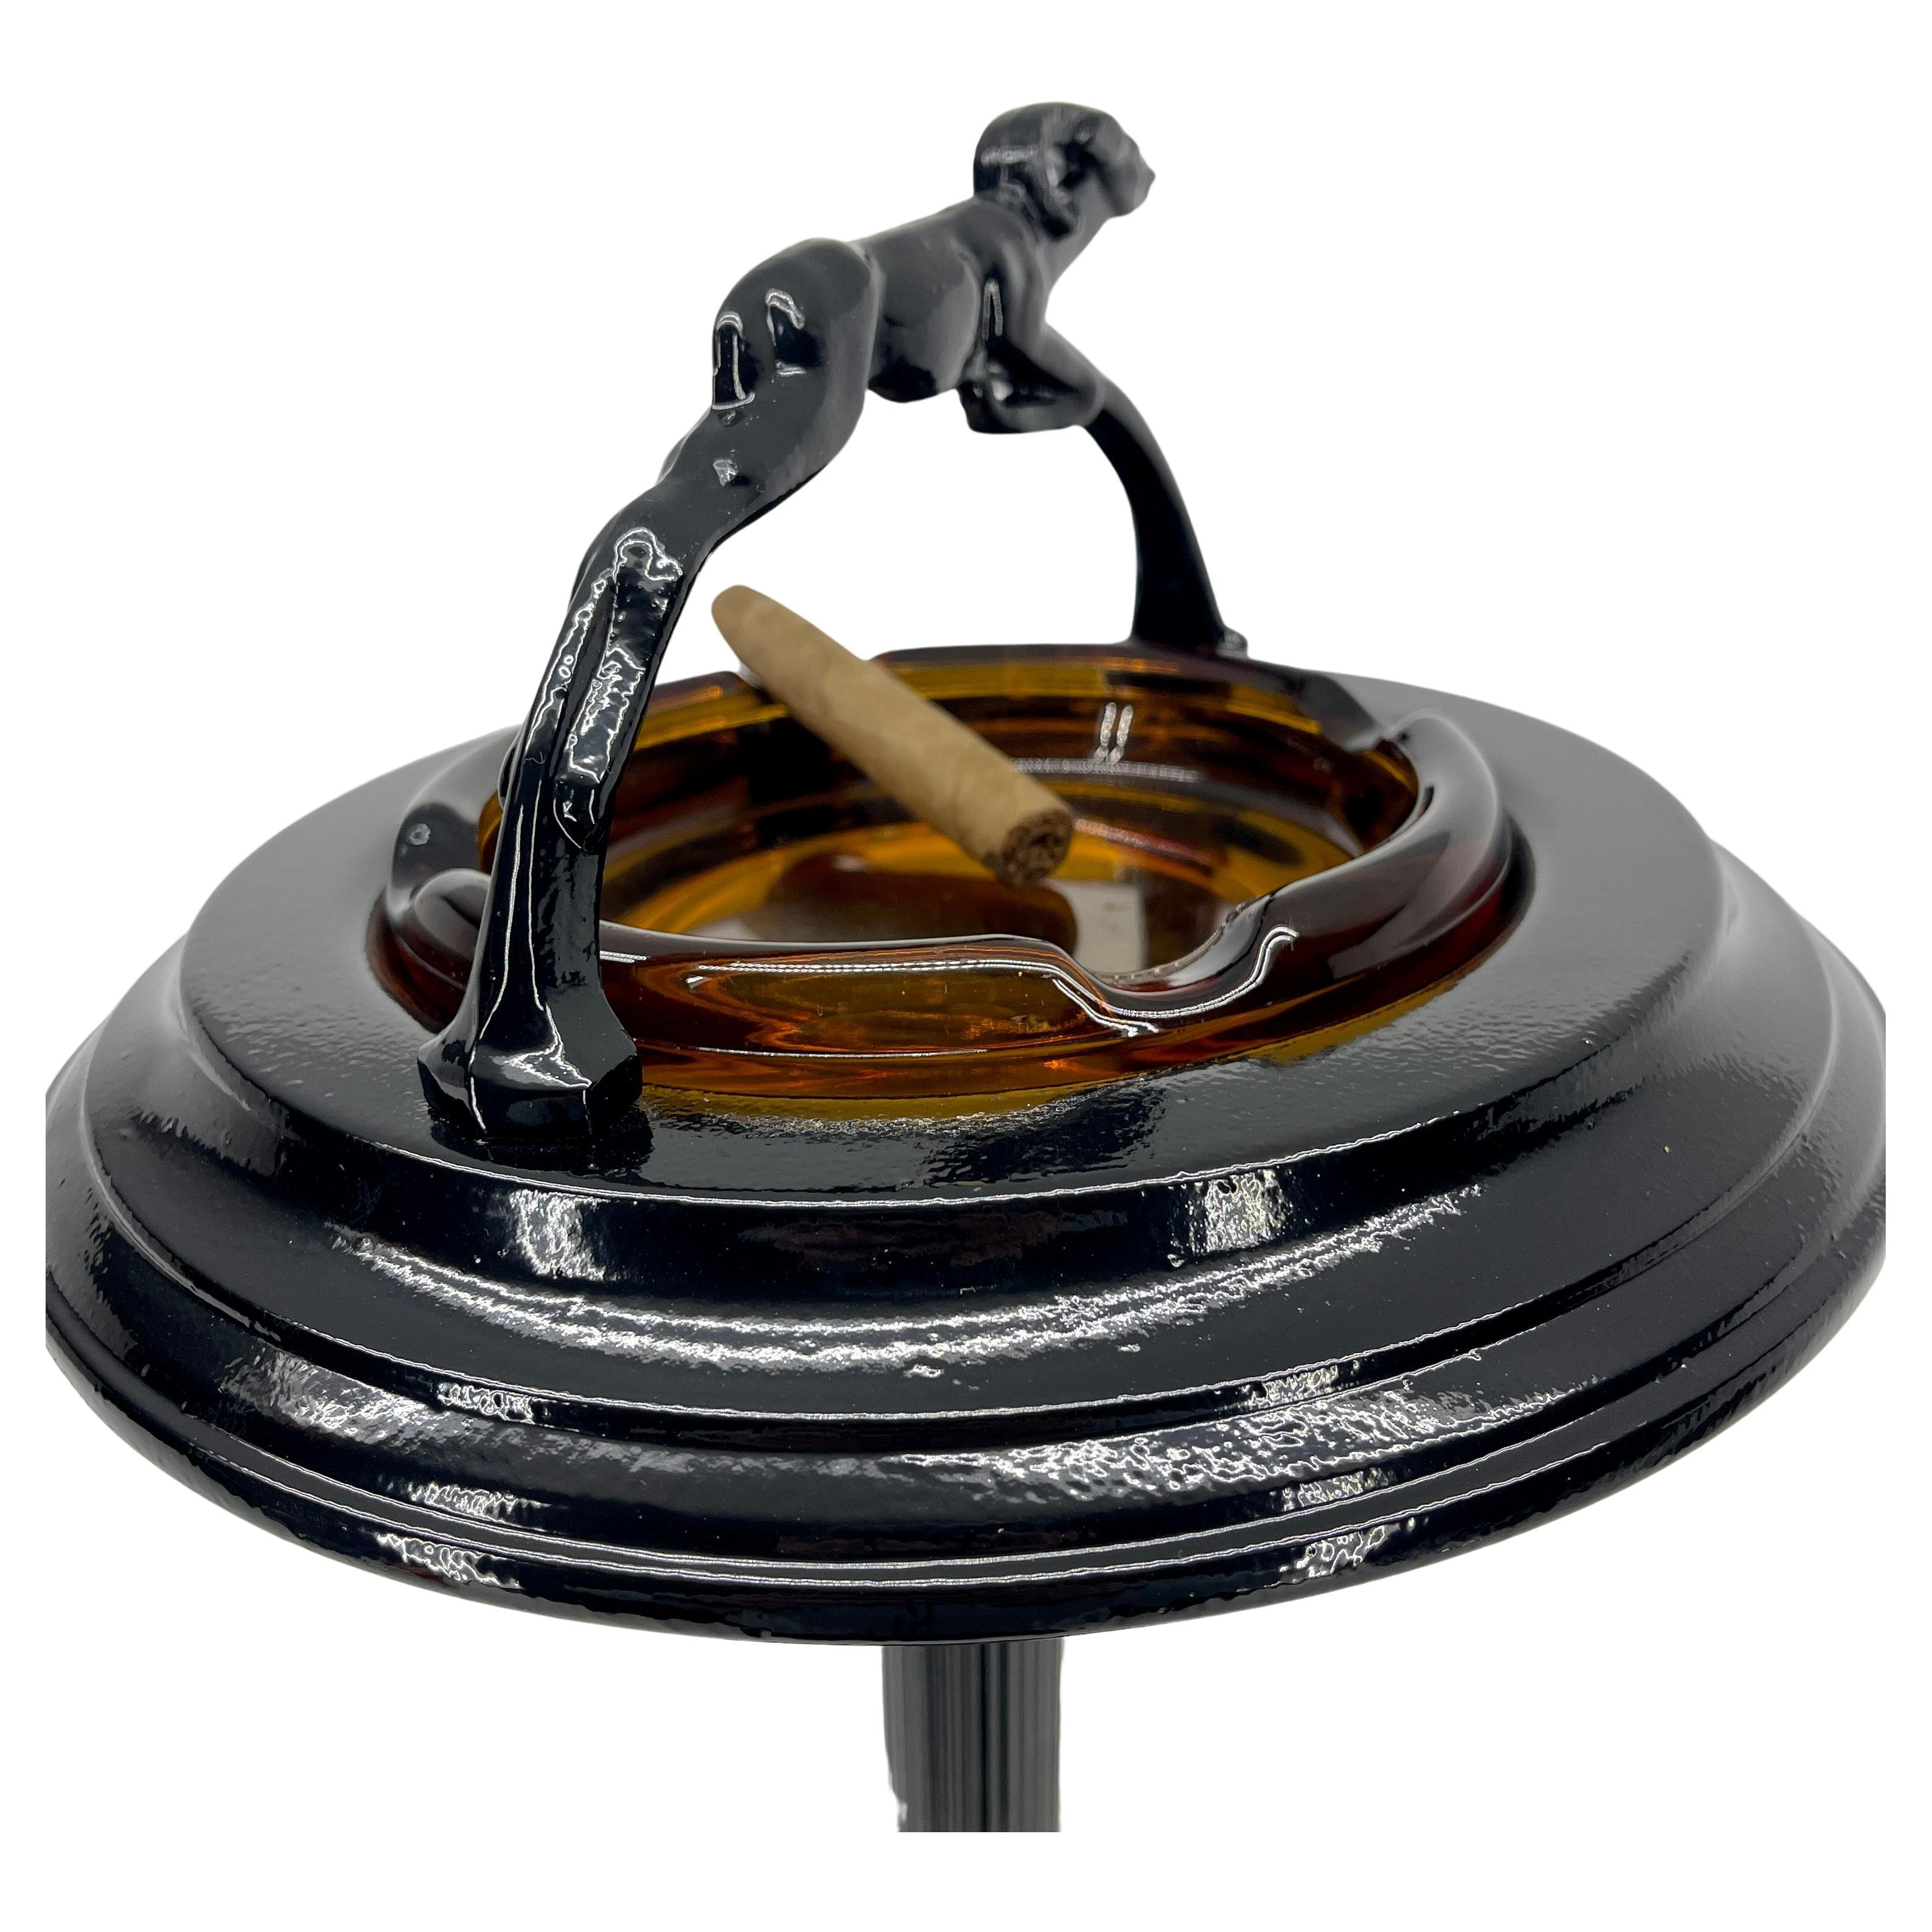 Black Painted Midcentury Floor Ashtray with Ram Sculpture and Amber Glass Tray In Good Condition For Sale In Haddonfield, NJ